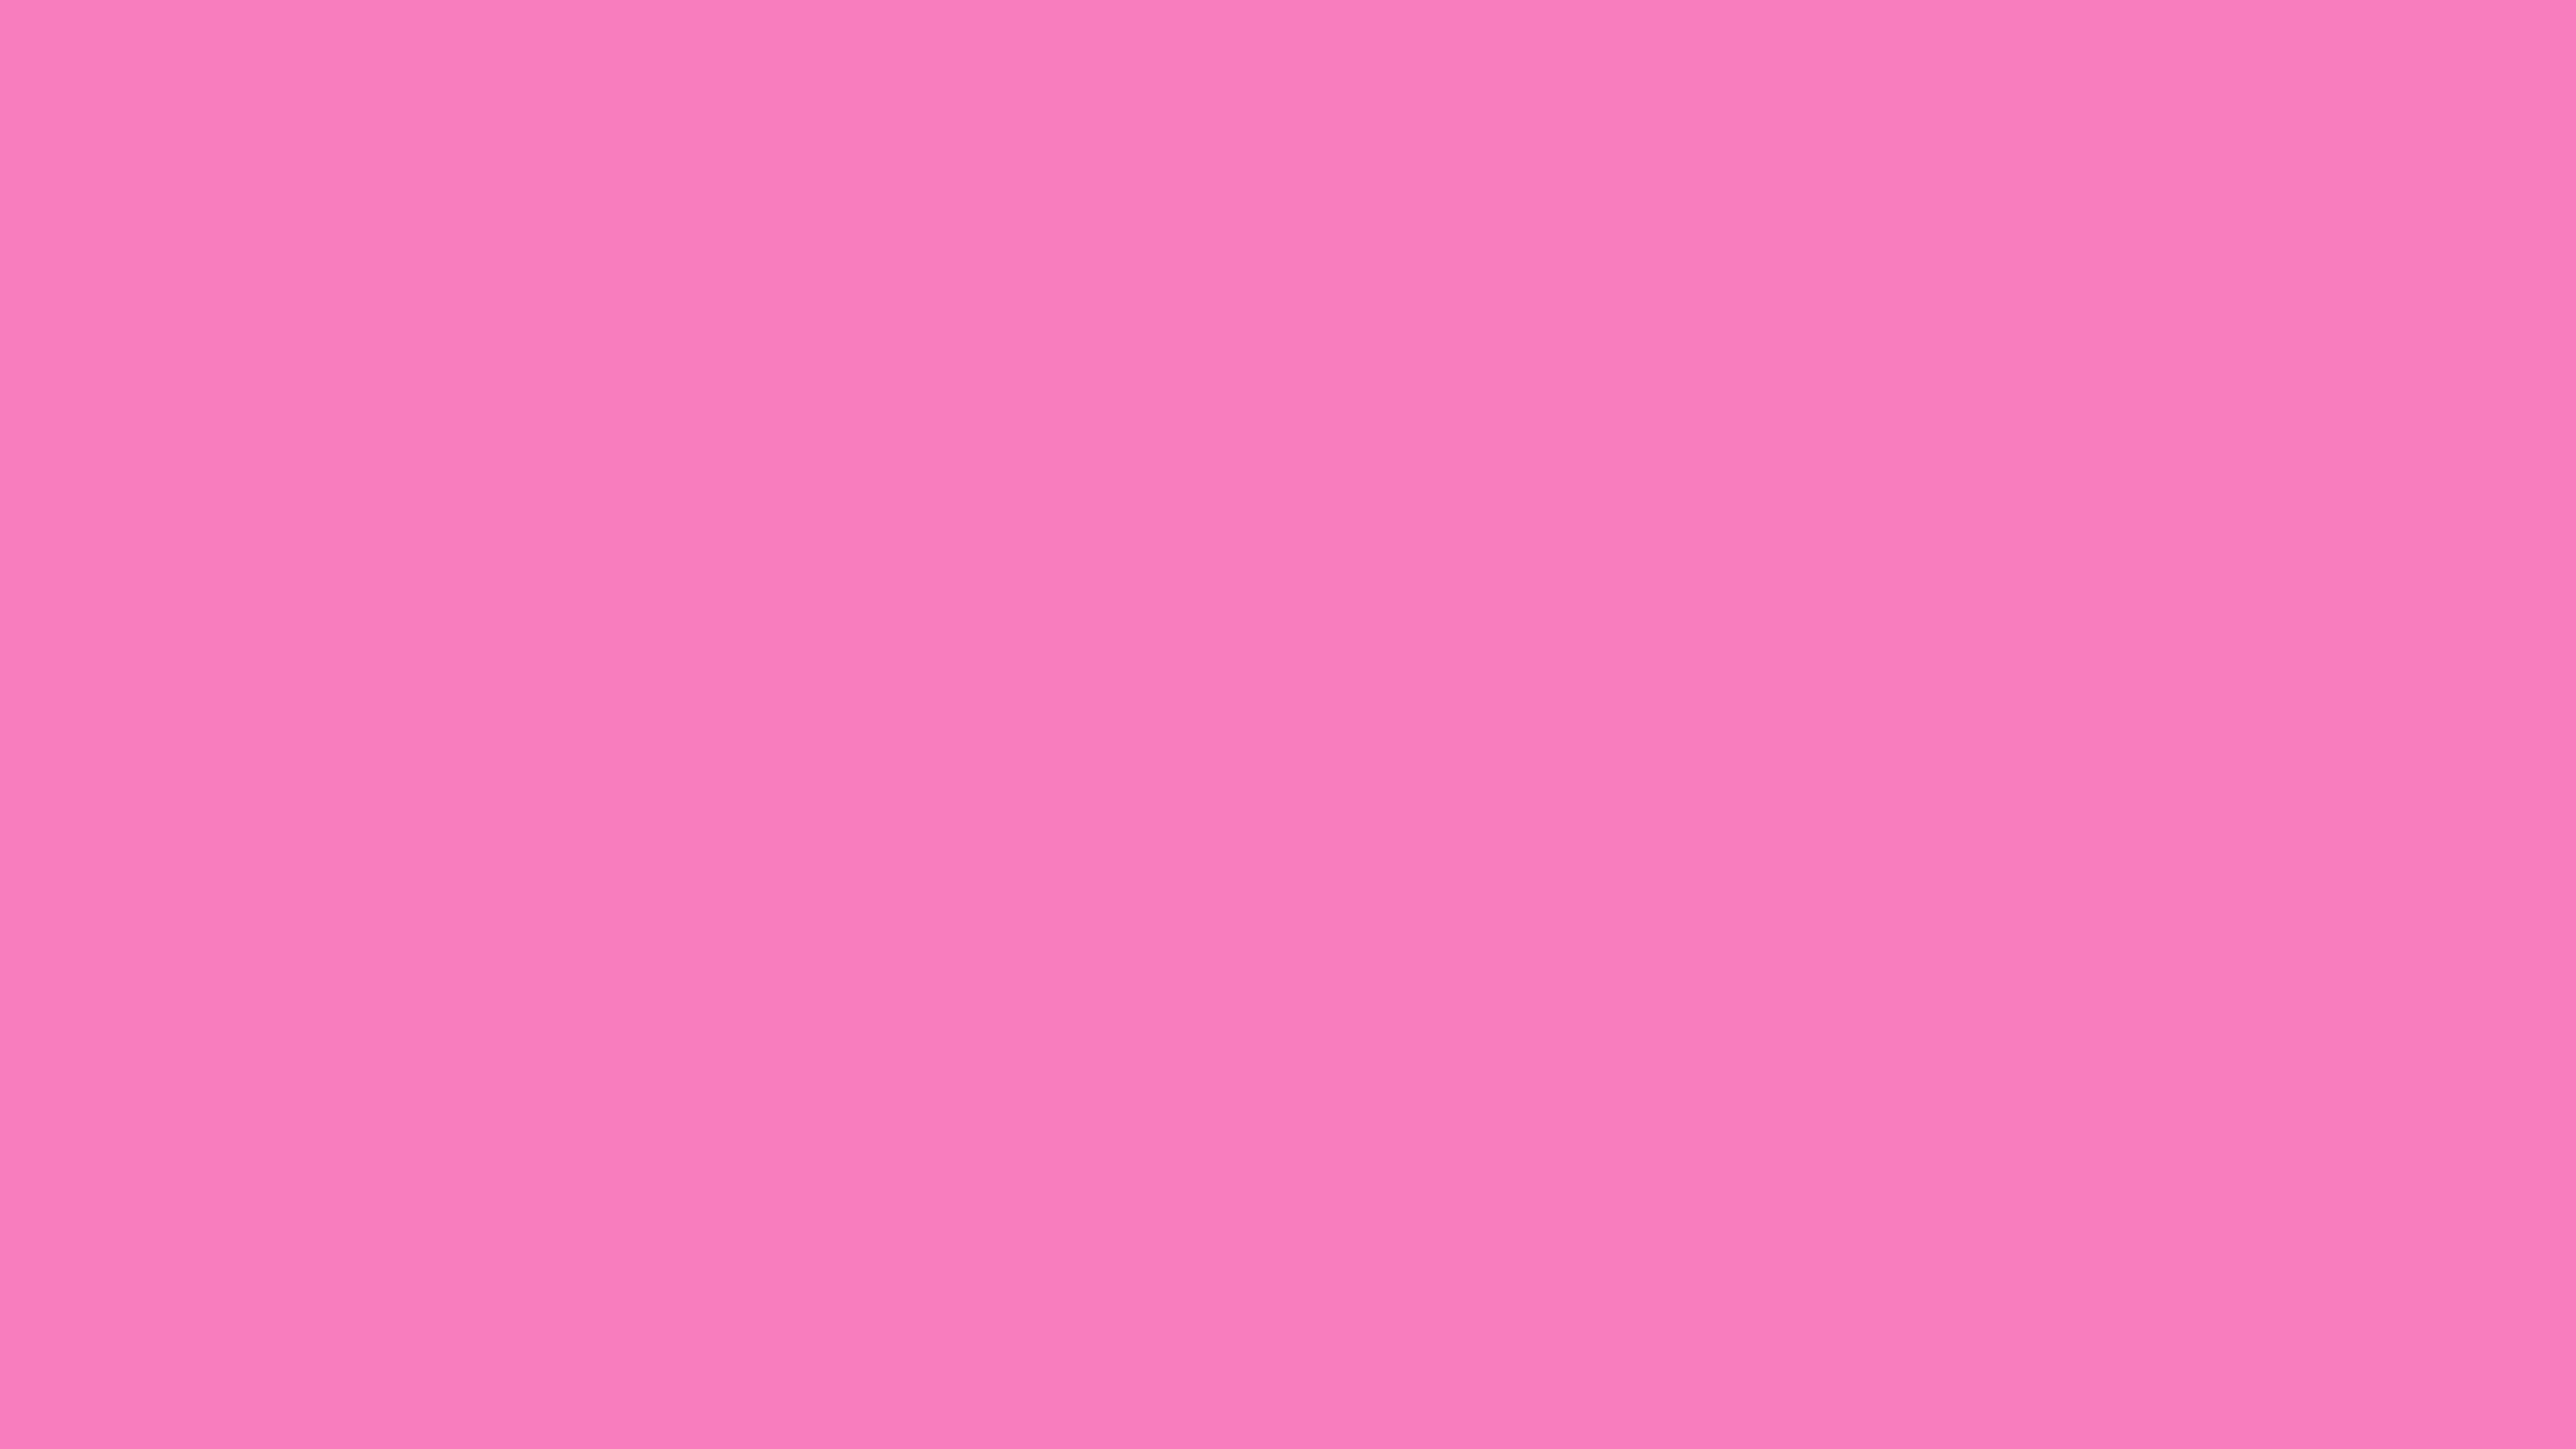 3840x2160 Persian Pink Solid Color Background